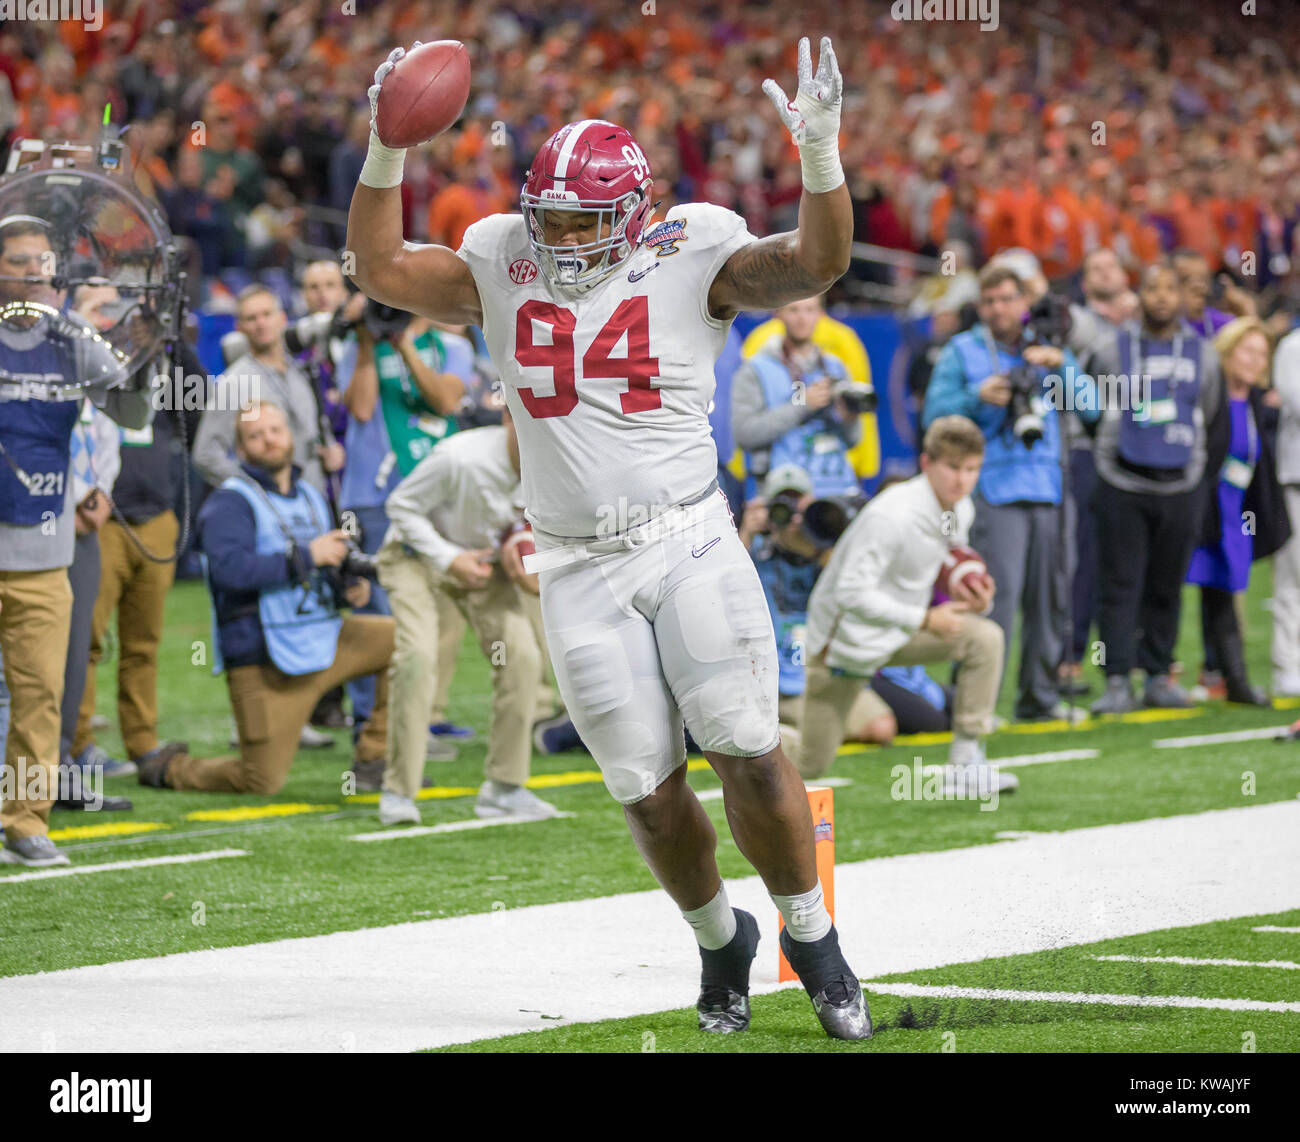 New Orleans, LA, USA. 1st Jan, 2018. Alabama defensive lineman Da'Ron Payne #94 scores a touchdown while playing on offense during the Allstate Sugar Bowl football game between the Clemson Tigers and the Alabama Crimson Tide at the Mercedes-Benz Supedome in New Orleans, LA. Kyle Okita/CSM/Alamy Live News Stock Photo